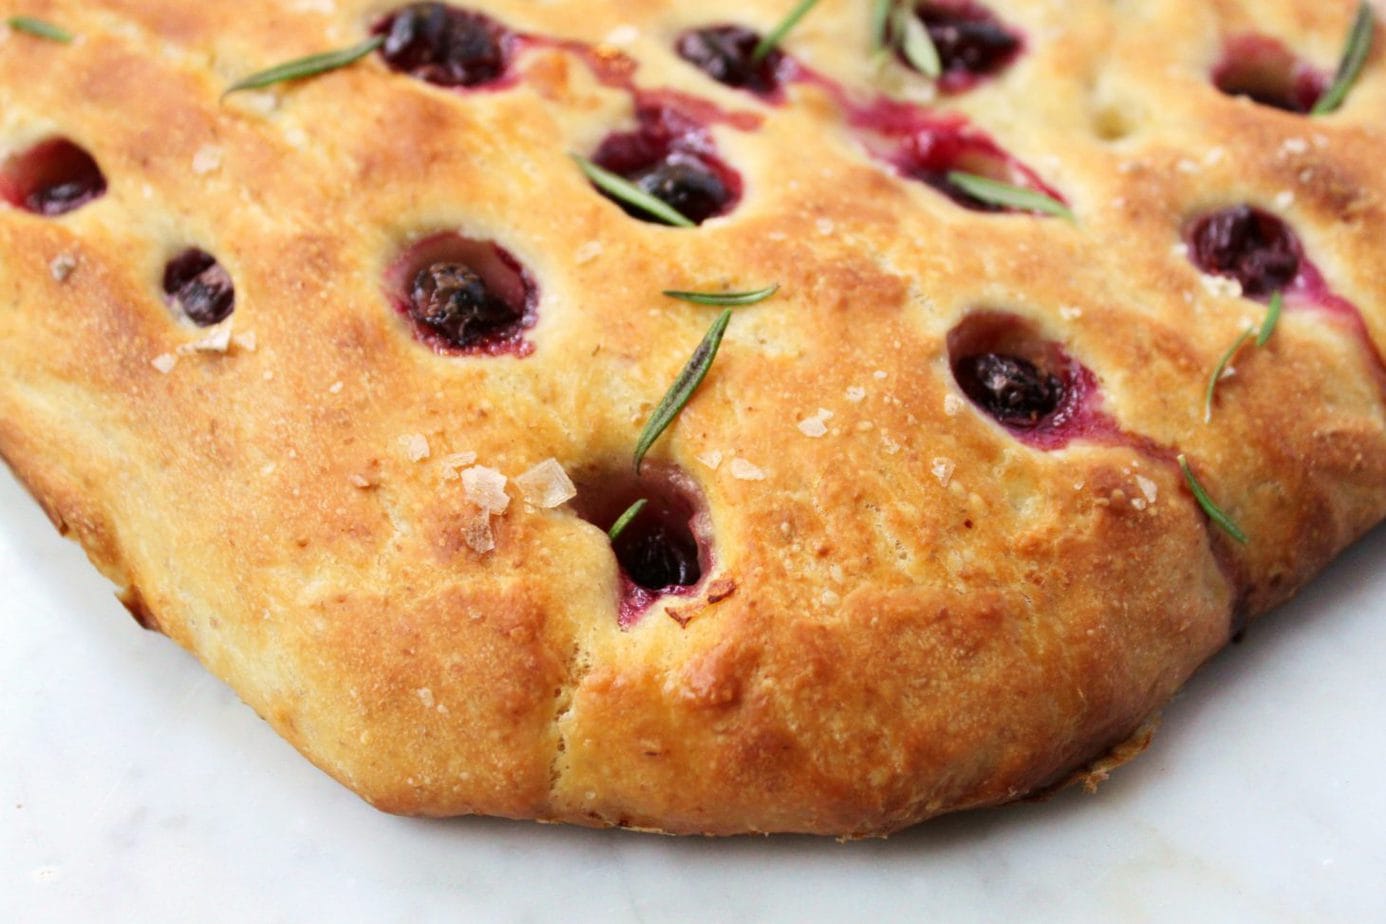 Golden baked sourdough focaccia with grapes and rosemary.